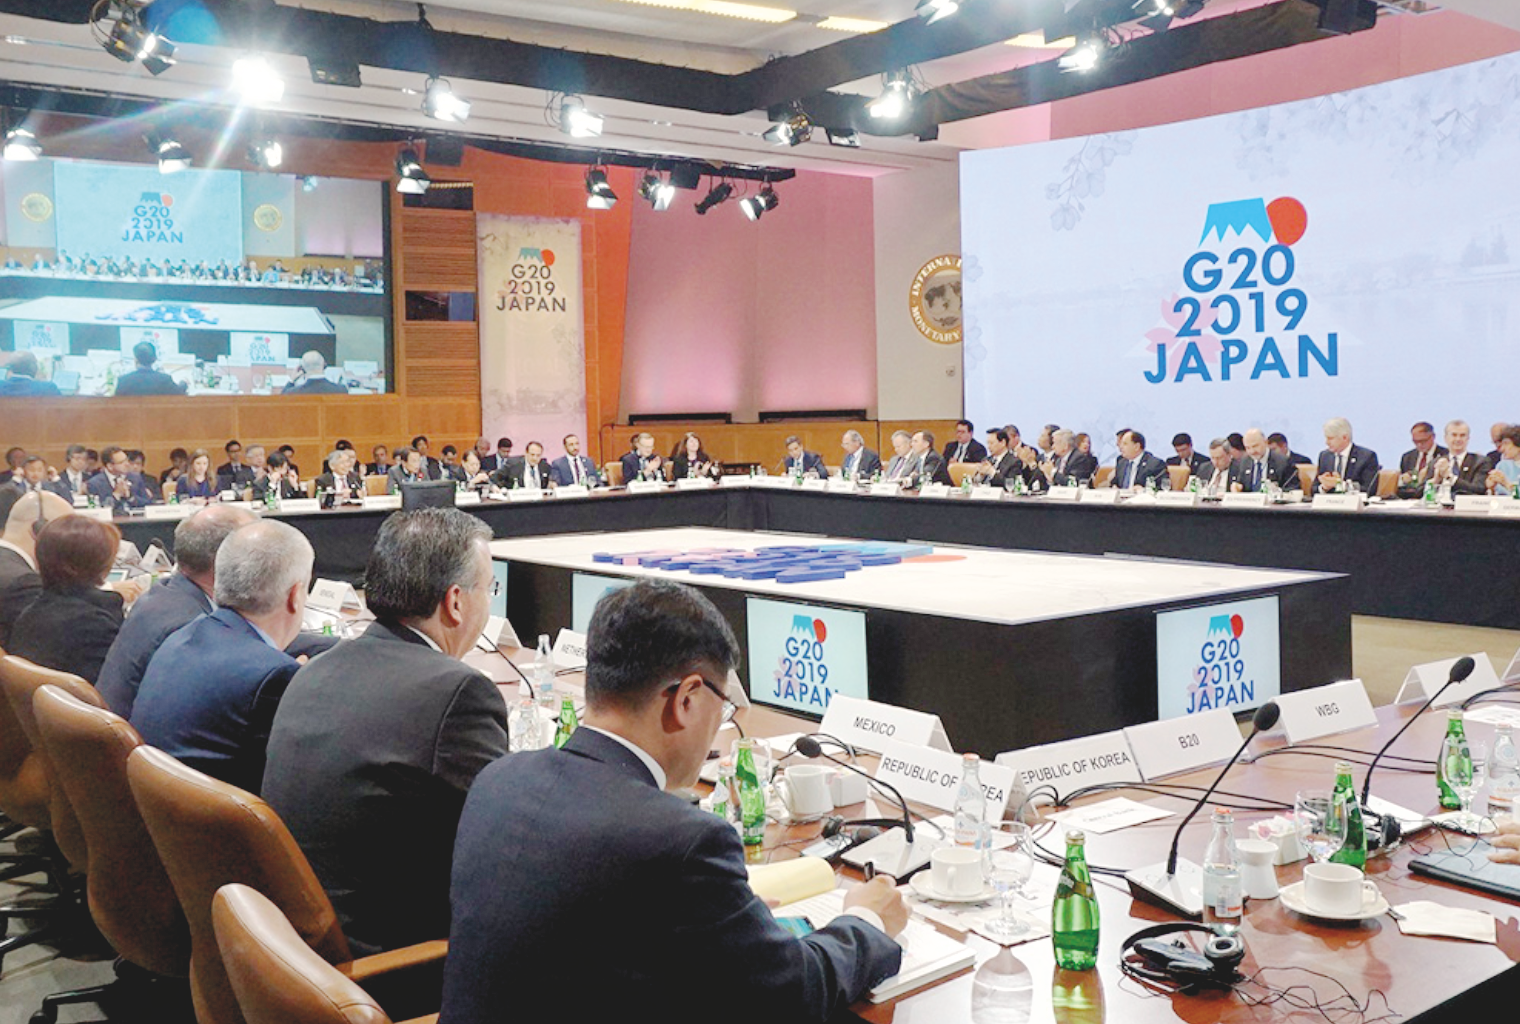 G20 Starts Crypto Discussions - A Look at Global Standards